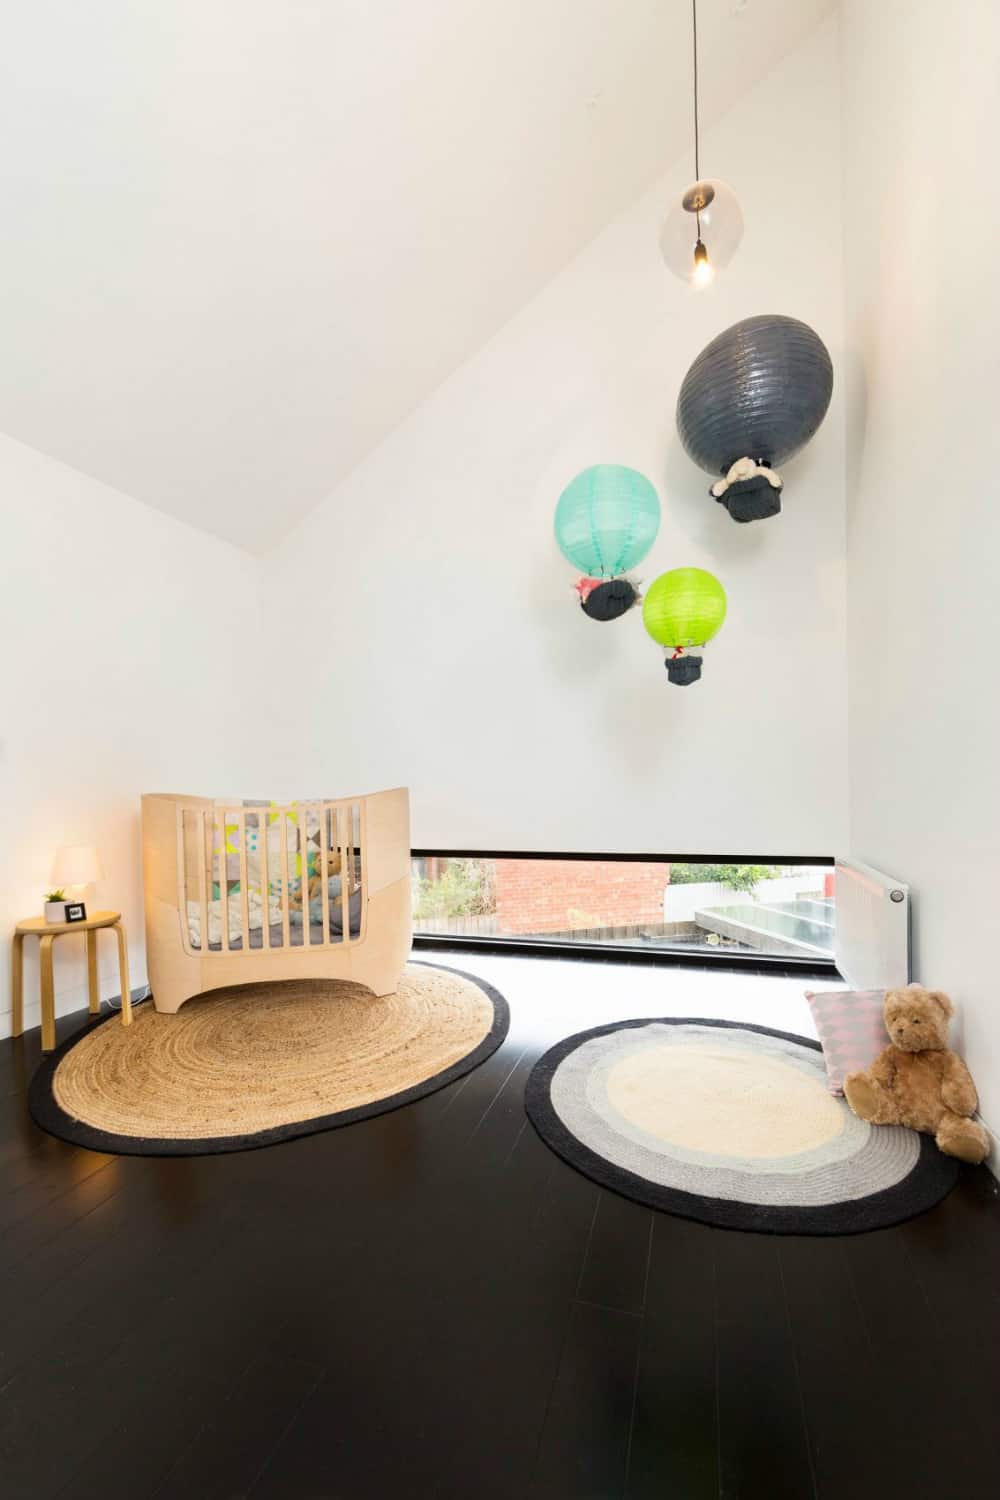 Kids room overlooks the backyard through a small transom